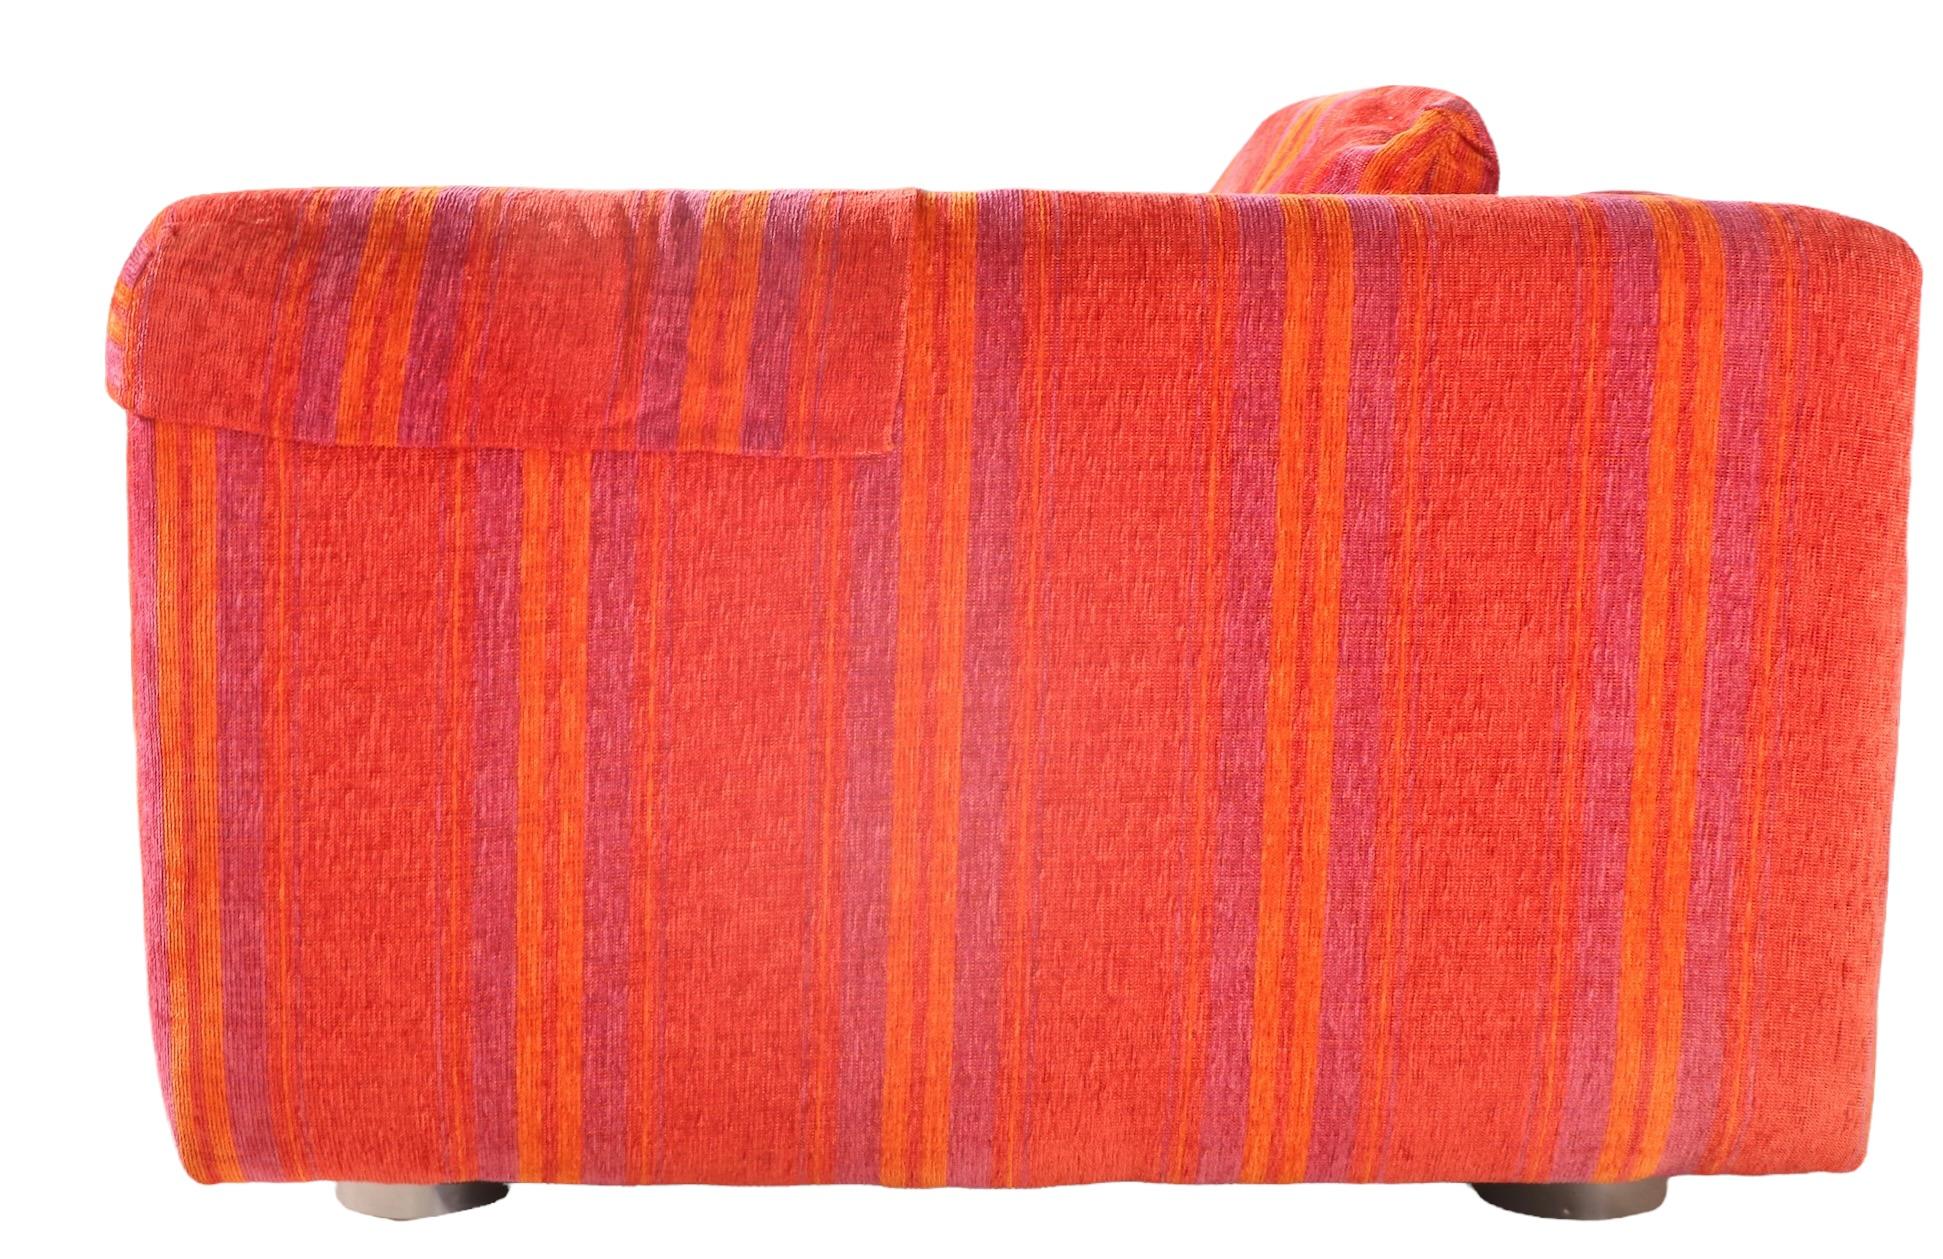 Upholstery Postmodern Selig Imperial Sofa Possibly by Milo Baughman  For Sale